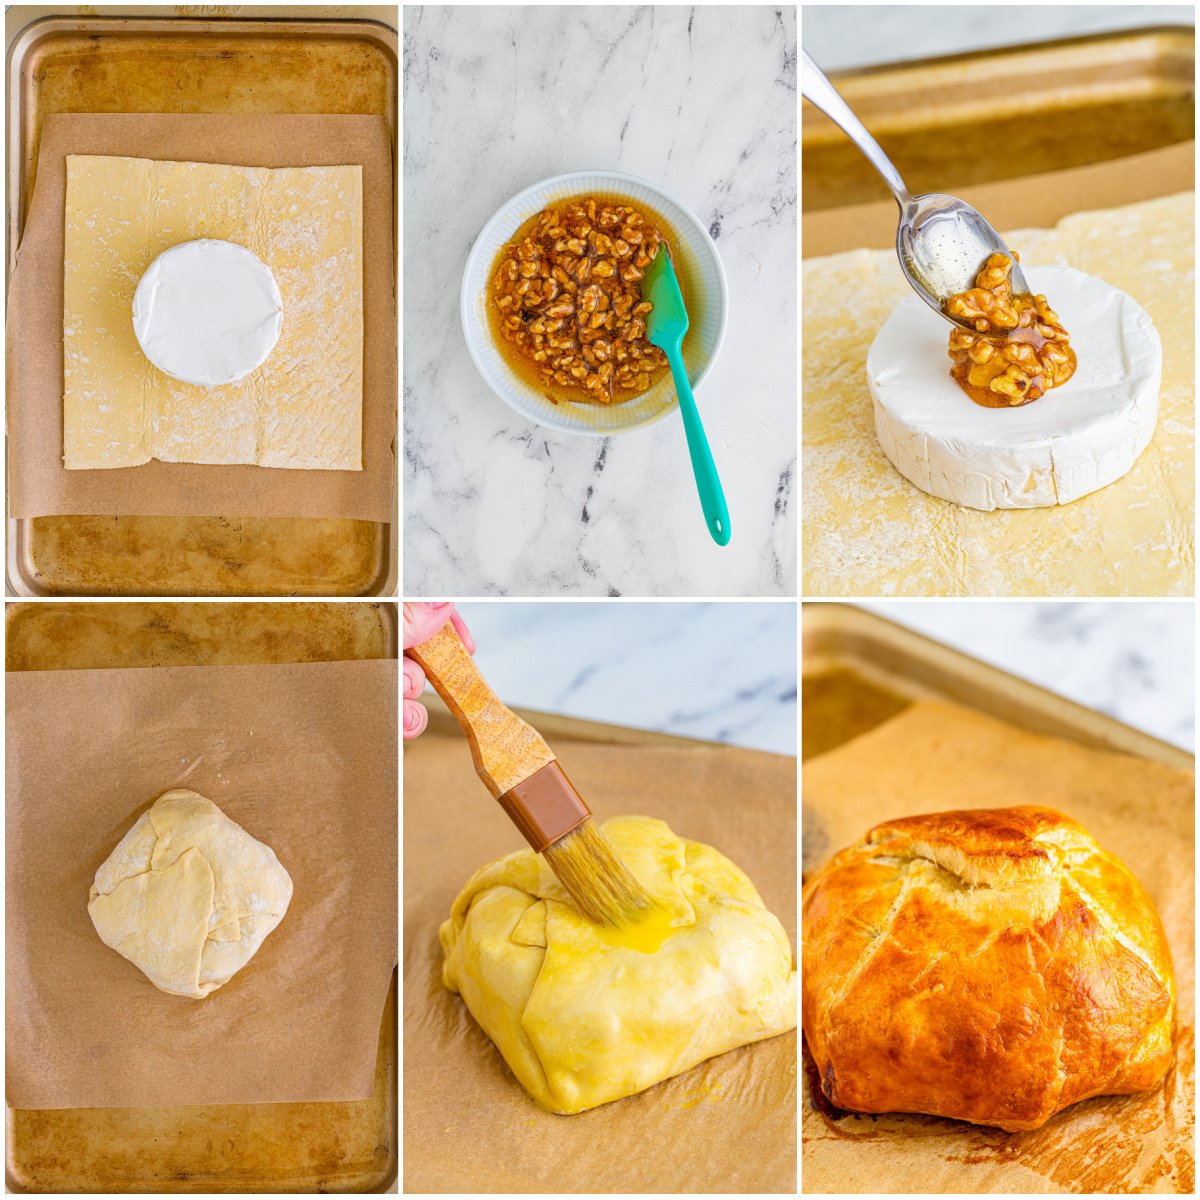 Step by step photos on how to make Baked Brie.